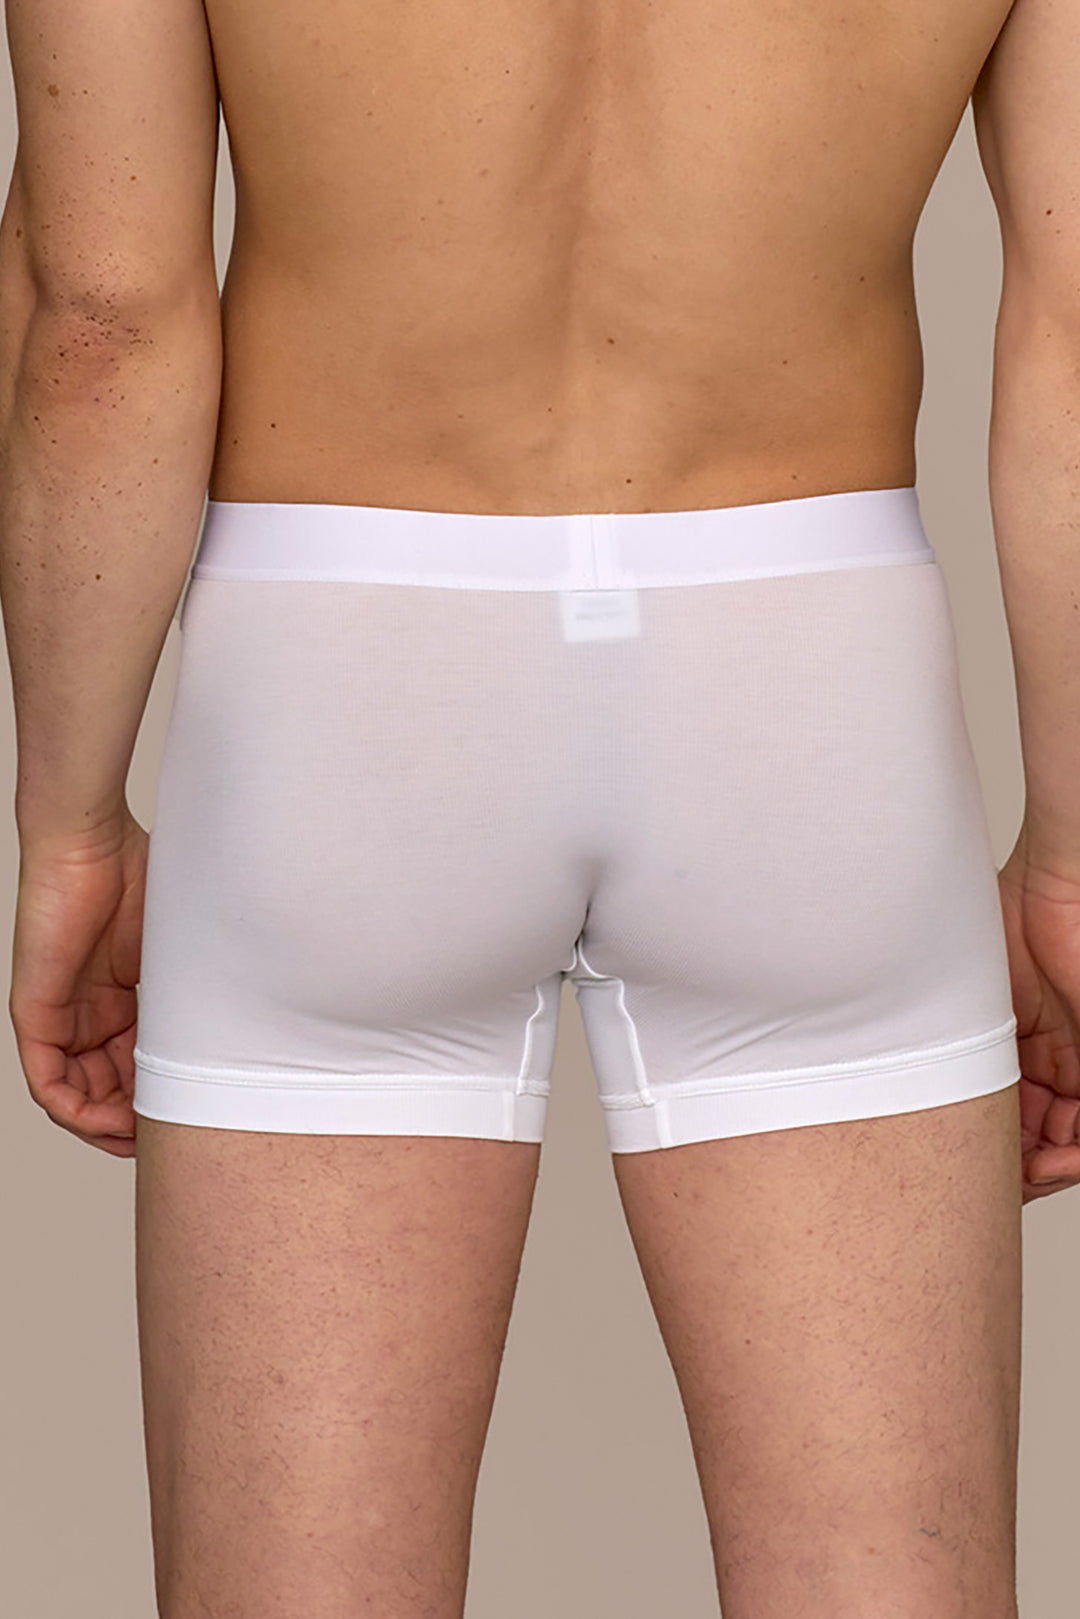 3-pack trunk white